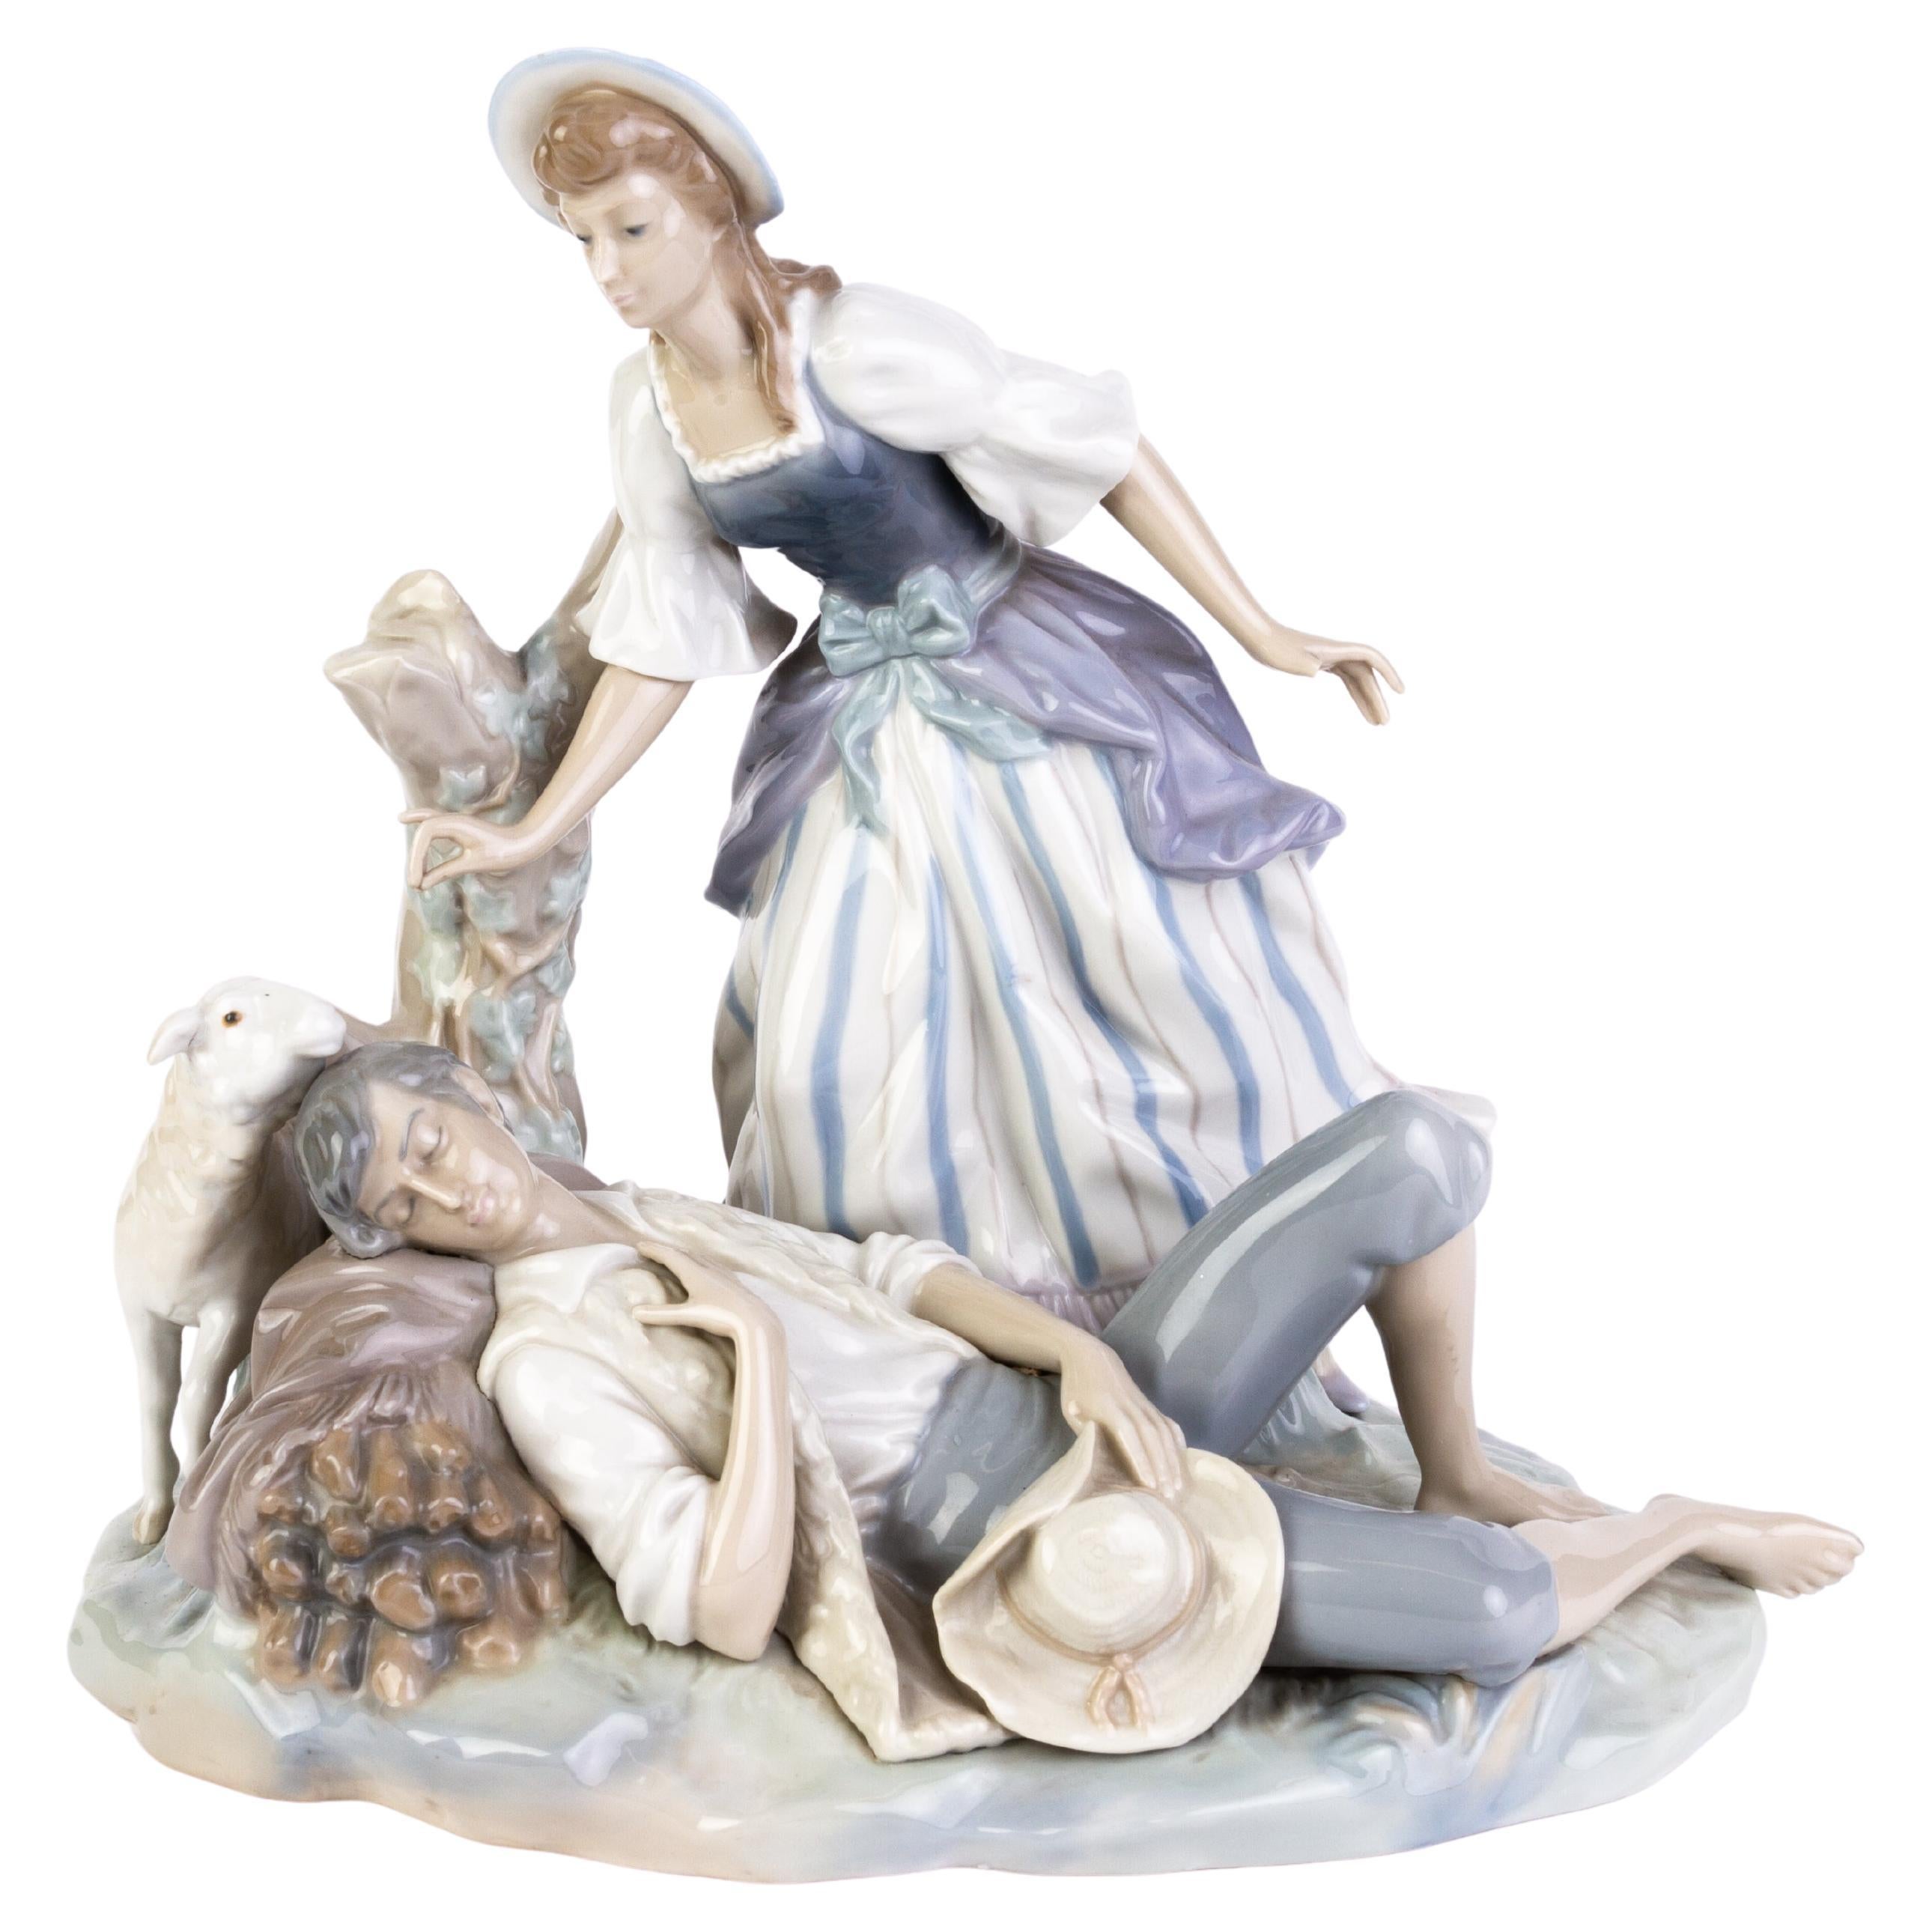 https://a.1stdibscdn.com/retired-lladro-fine-porcelain-sculpture-figure-group-rest-in-the-country-4760-for-sale/f_90032/f_355100121690910373359/f_35510012_1690910374647_bg_processed.jpg